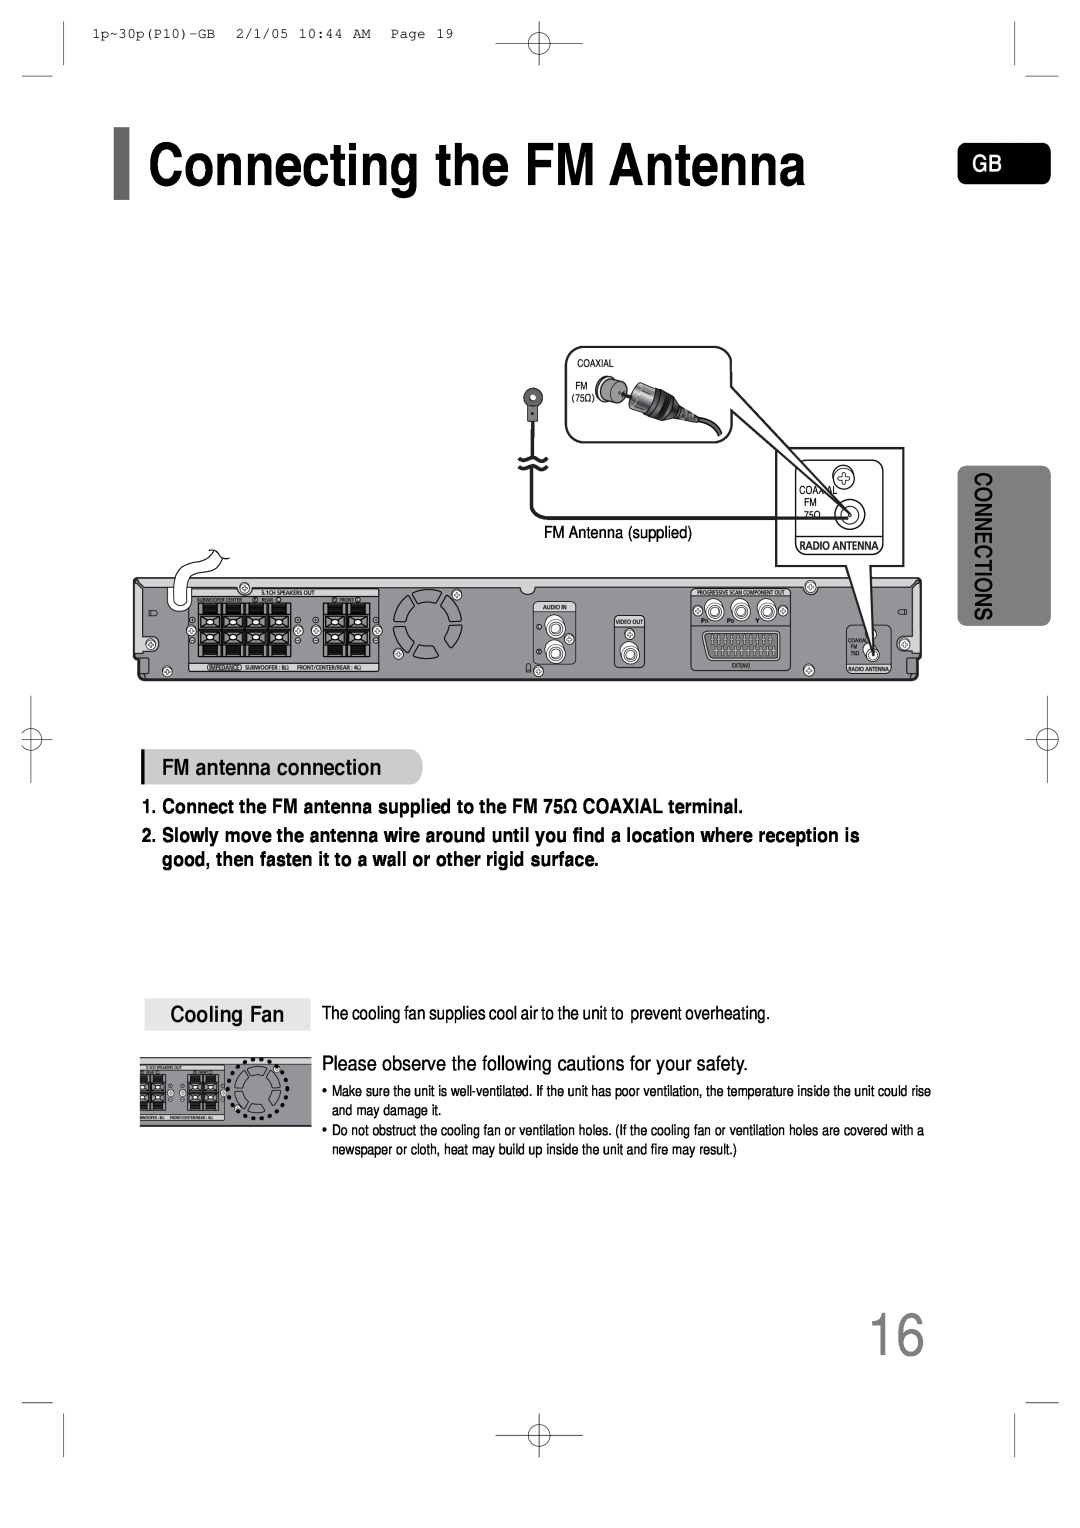 Samsung P10 instruction manual Connecting the FM Antenna, FM antenna connection, Cooling Fan 